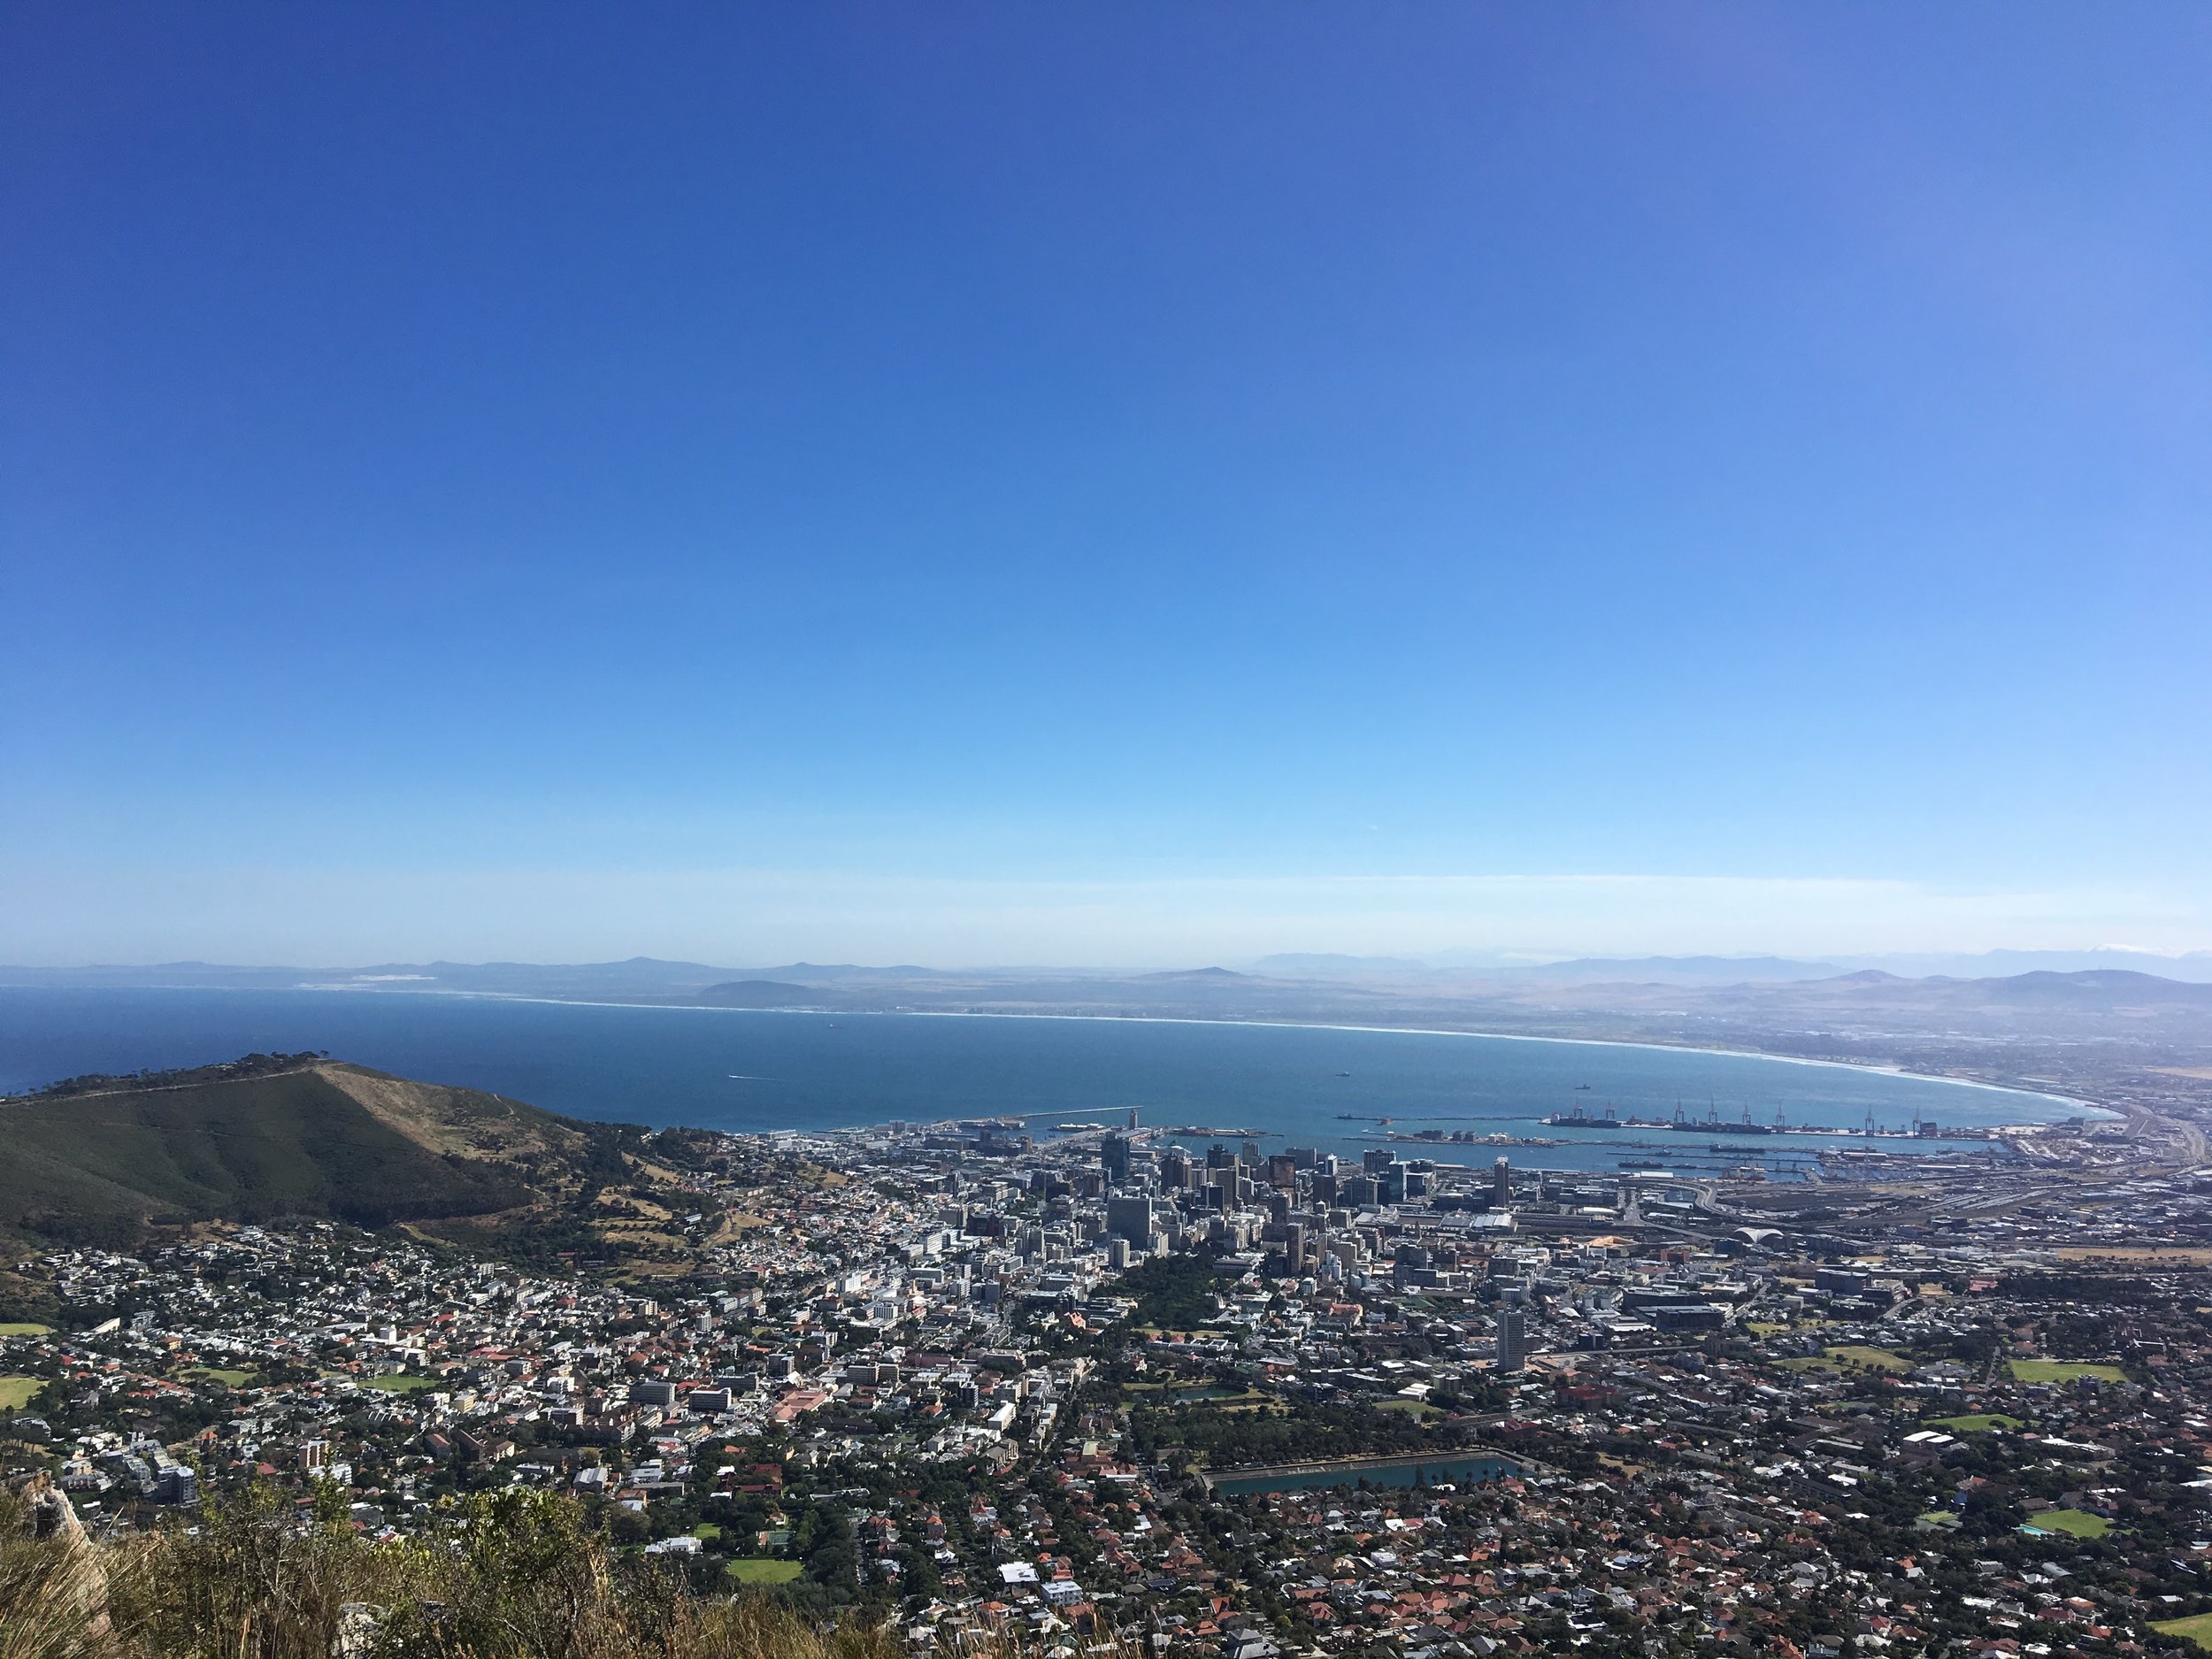 hiking up table mountain with my niece Maia4.JPG